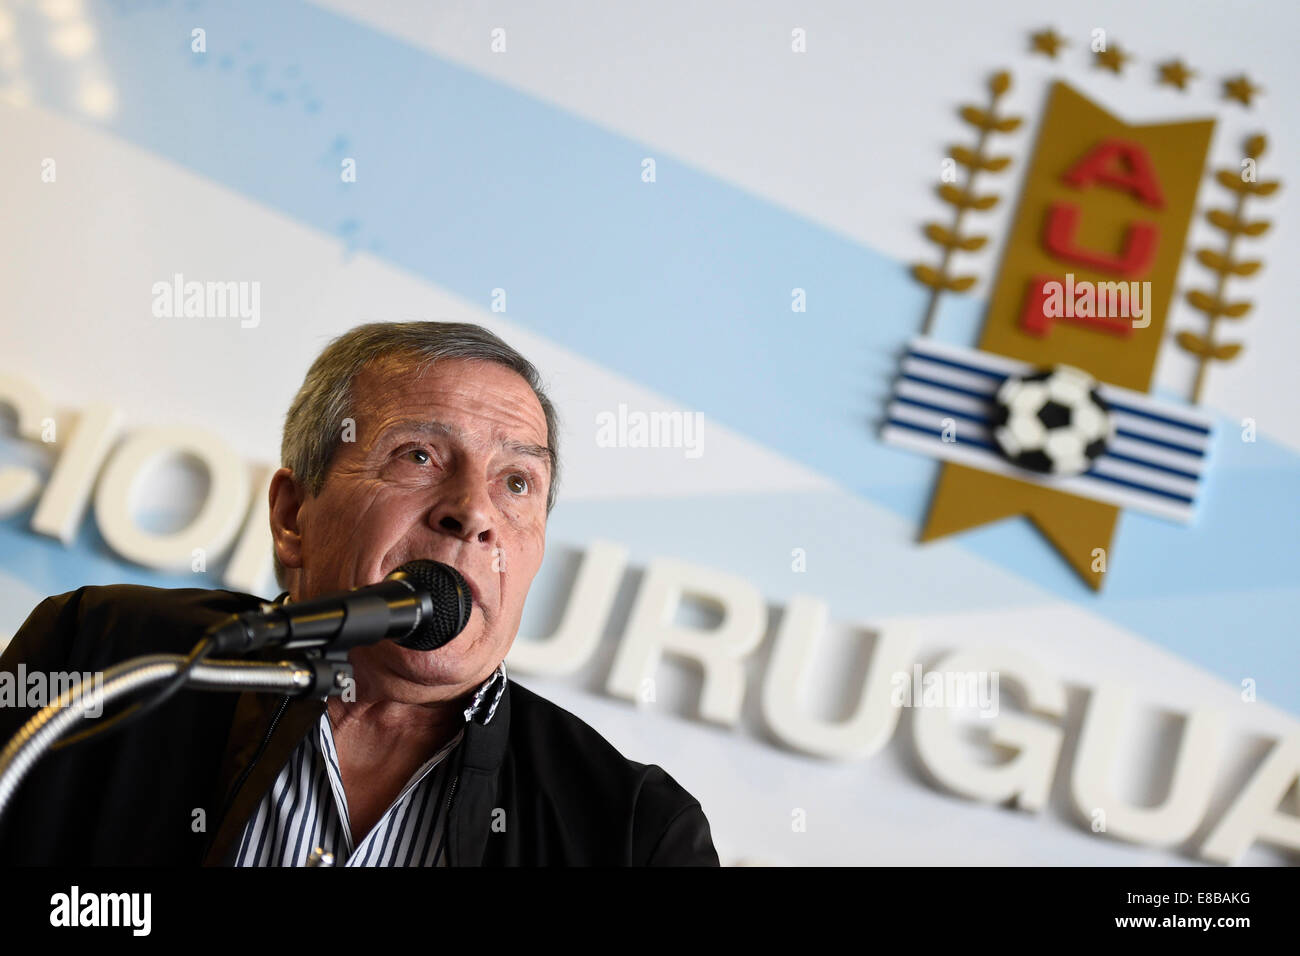 Montevideo, Uruguay. 3rd Oct, 2014. Uruguay's national soccer team head coach Oscar Washington Tabarez speaks during a press conference held at the headquarters of Uruguayan Football Association (AFU, for its acronym in Spanish) in Montevideo, capital of Uruguay, on Oct. 3, 2014. Tabarez renewed his contract with the AFU to lead the Uruguayan national soccer team until 2018 World Cup Russia. © Nicolas Celaya/Xinhua/Alamy Live News Stock Photo